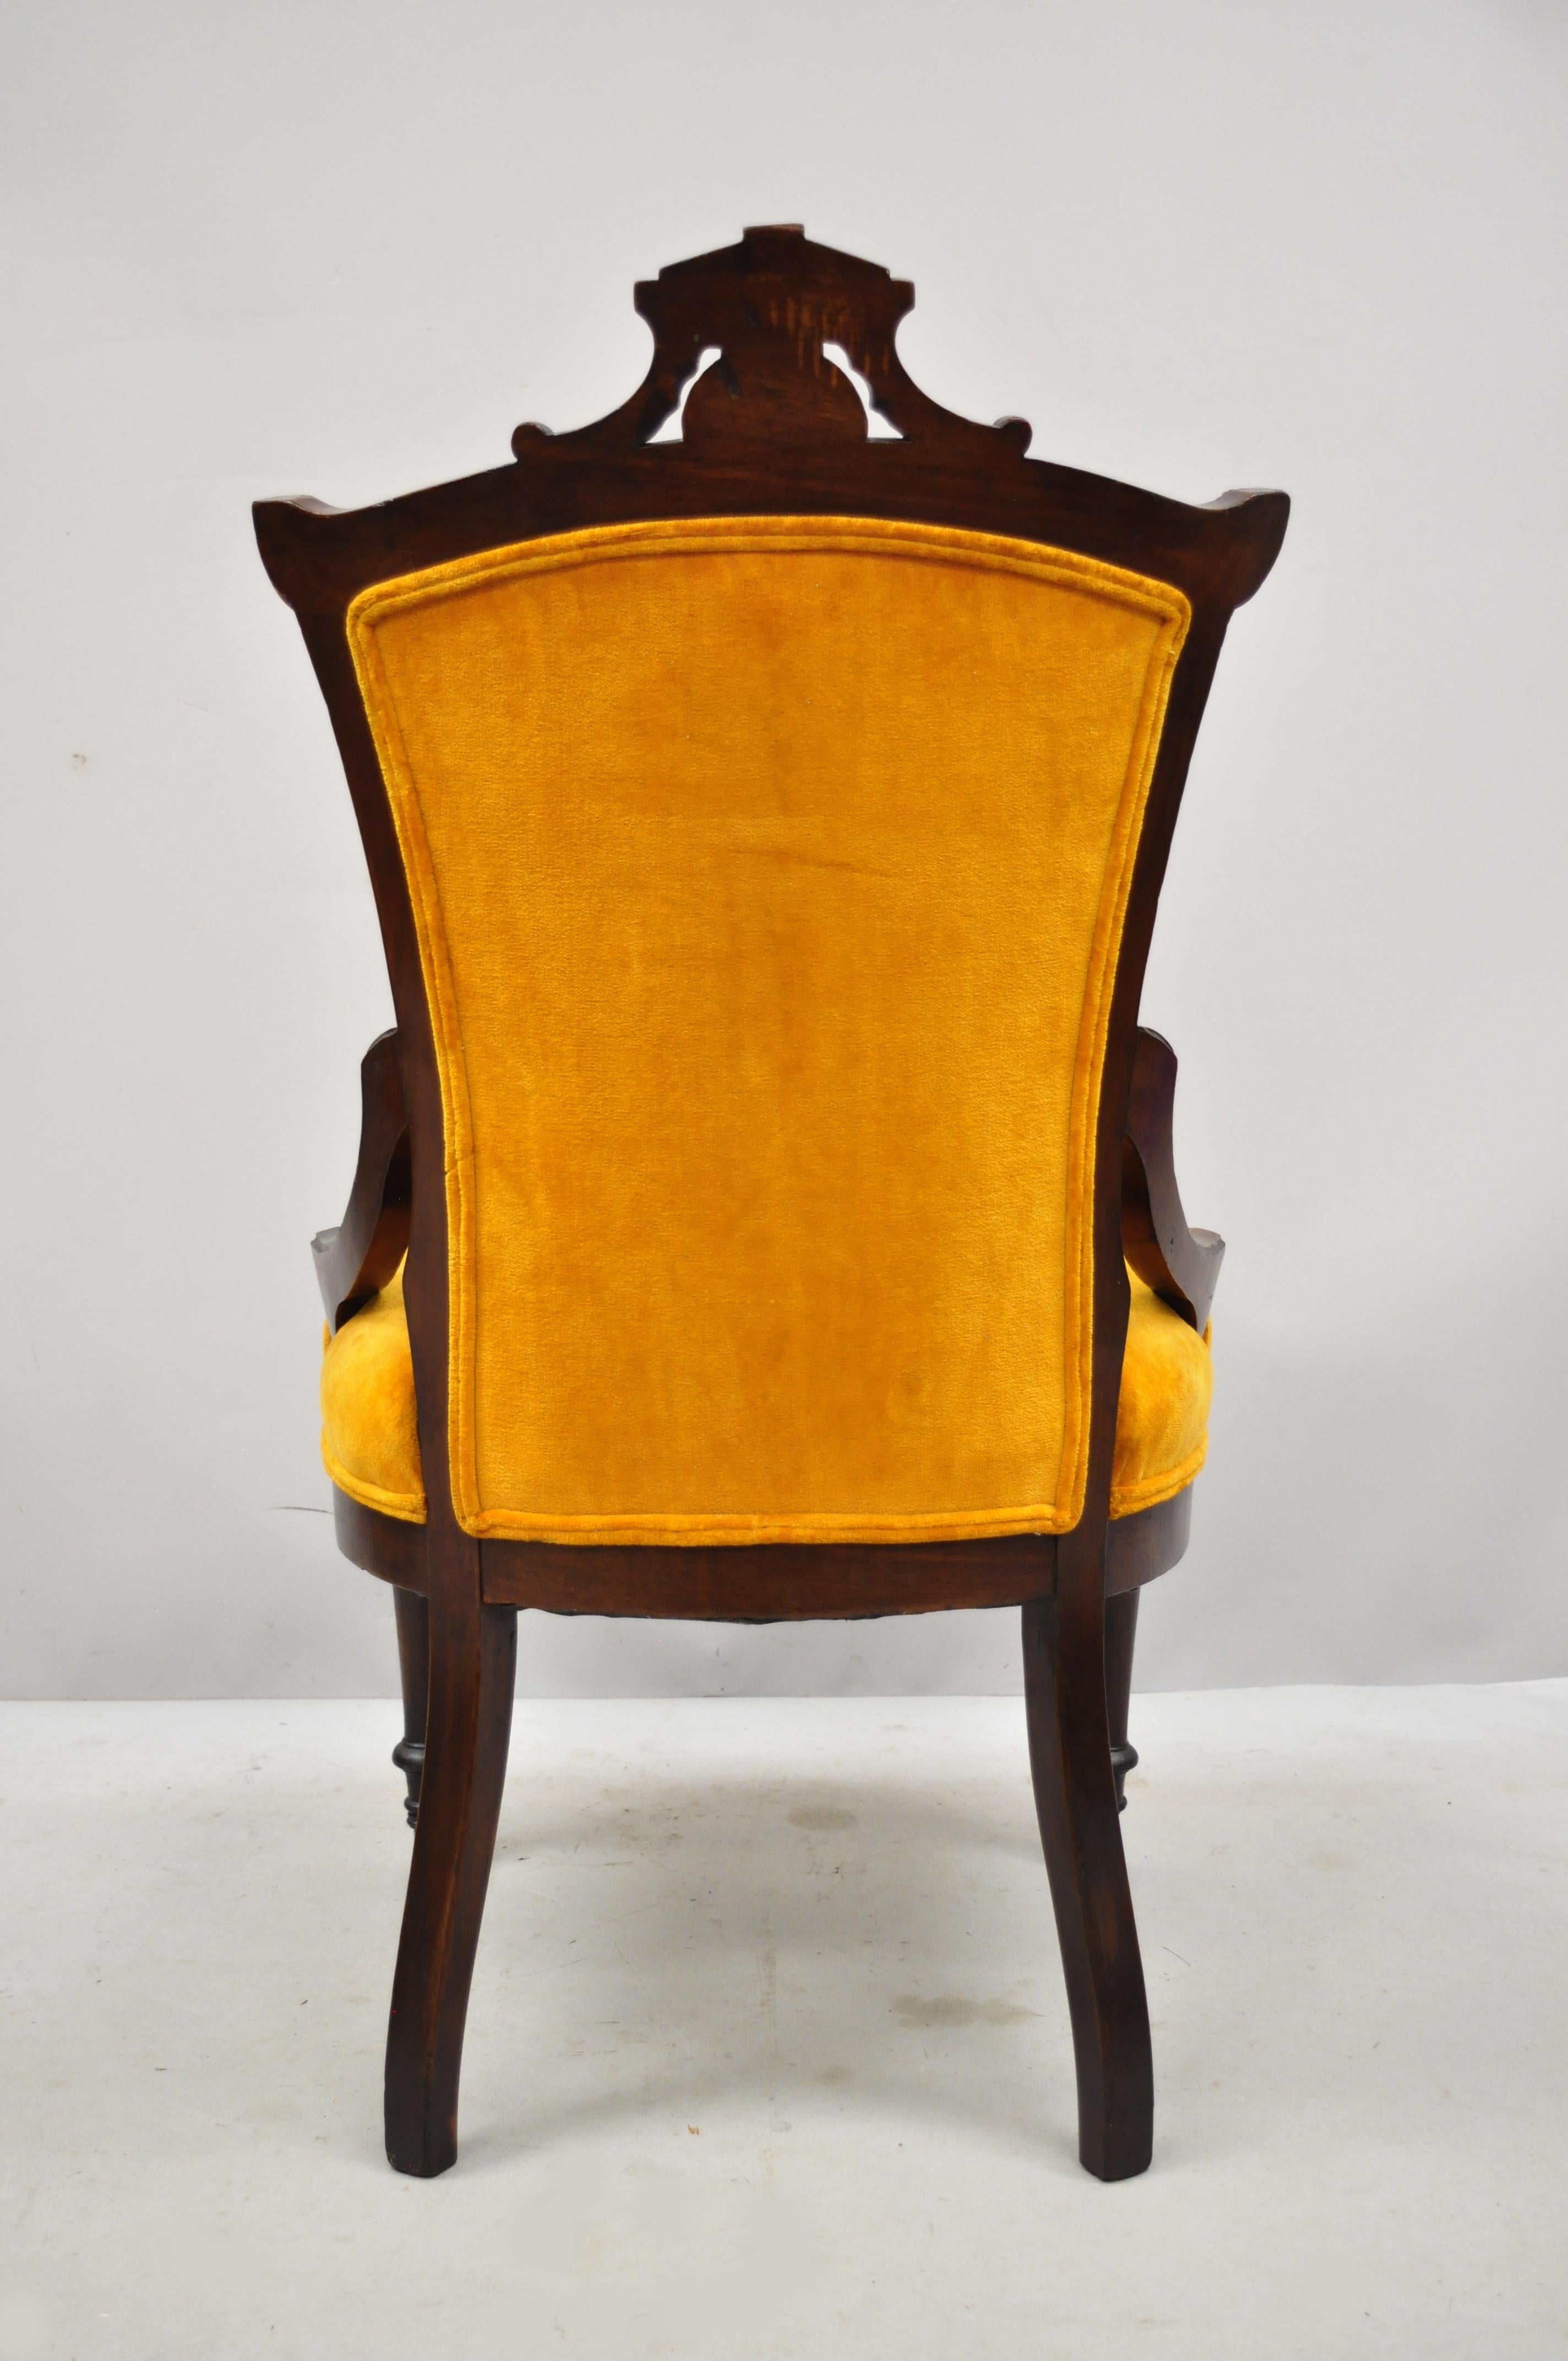 Antique Victorian Eastlake Carved Walnut Orange Tufted Parlor Side Chairs, Pair 1